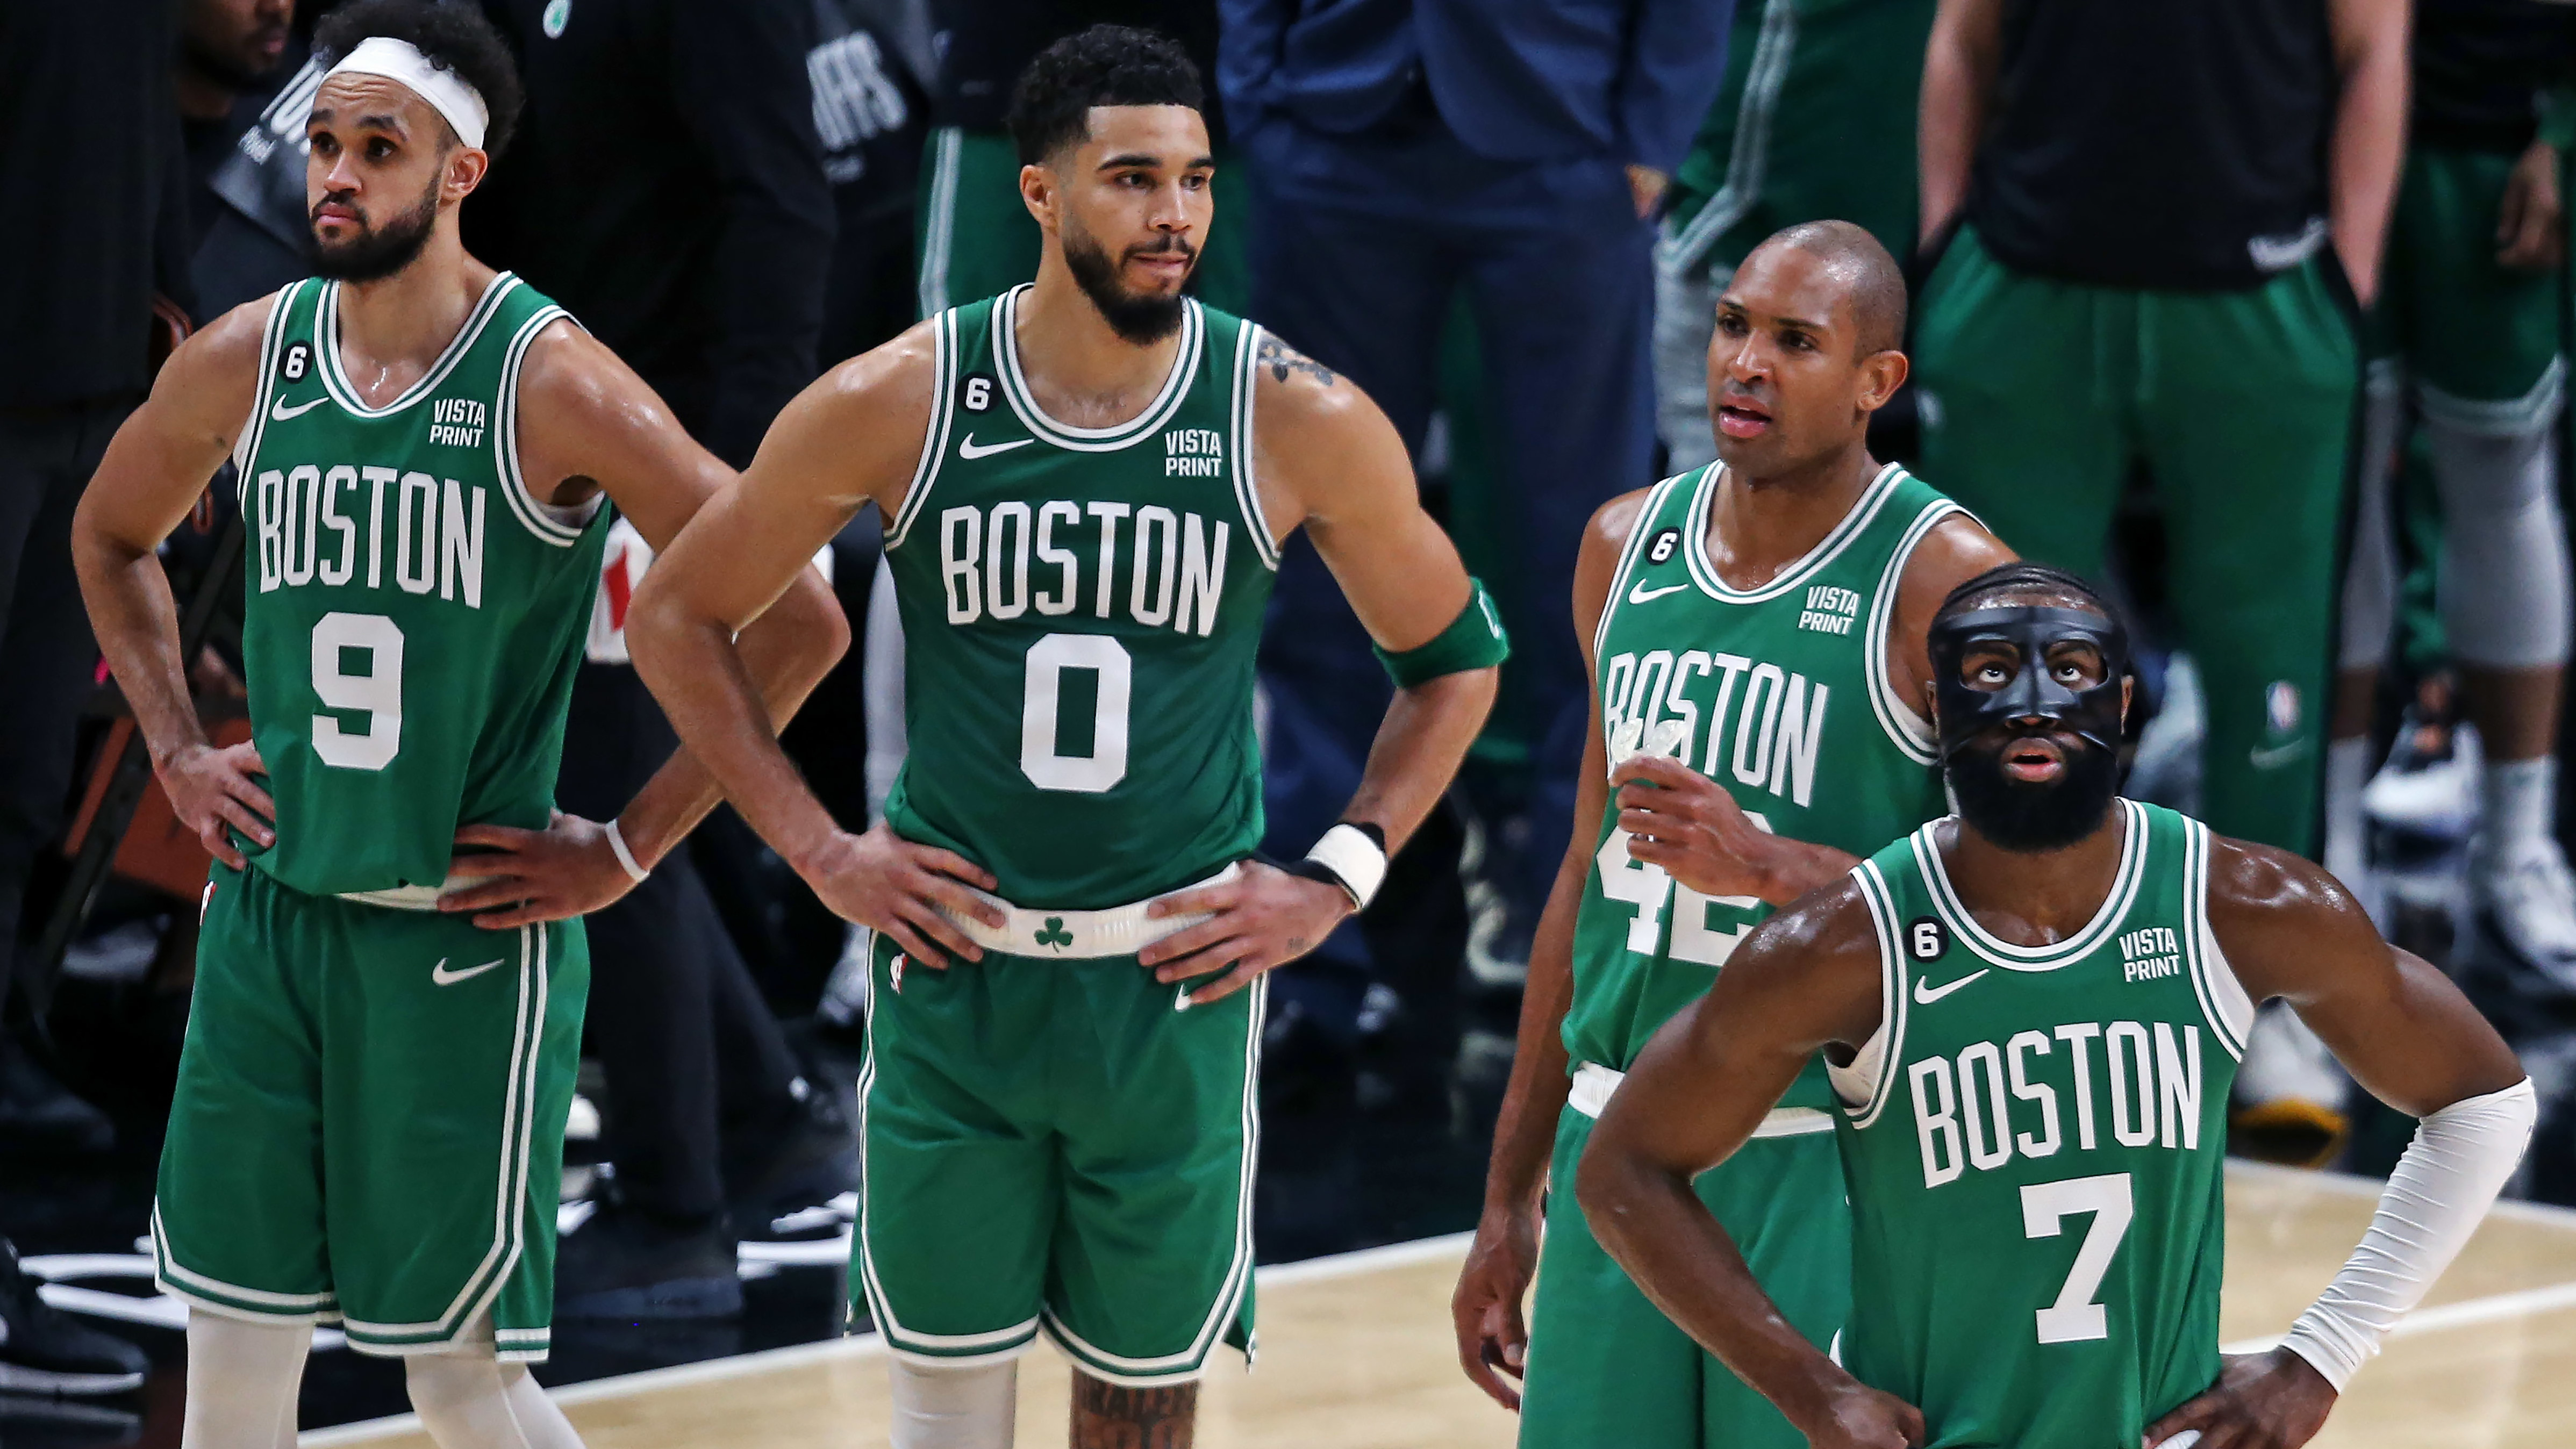 errick White, Jayson Tatum, Al Horford and Jaylen Brown stand on the court in the final moments of the fourth quarter